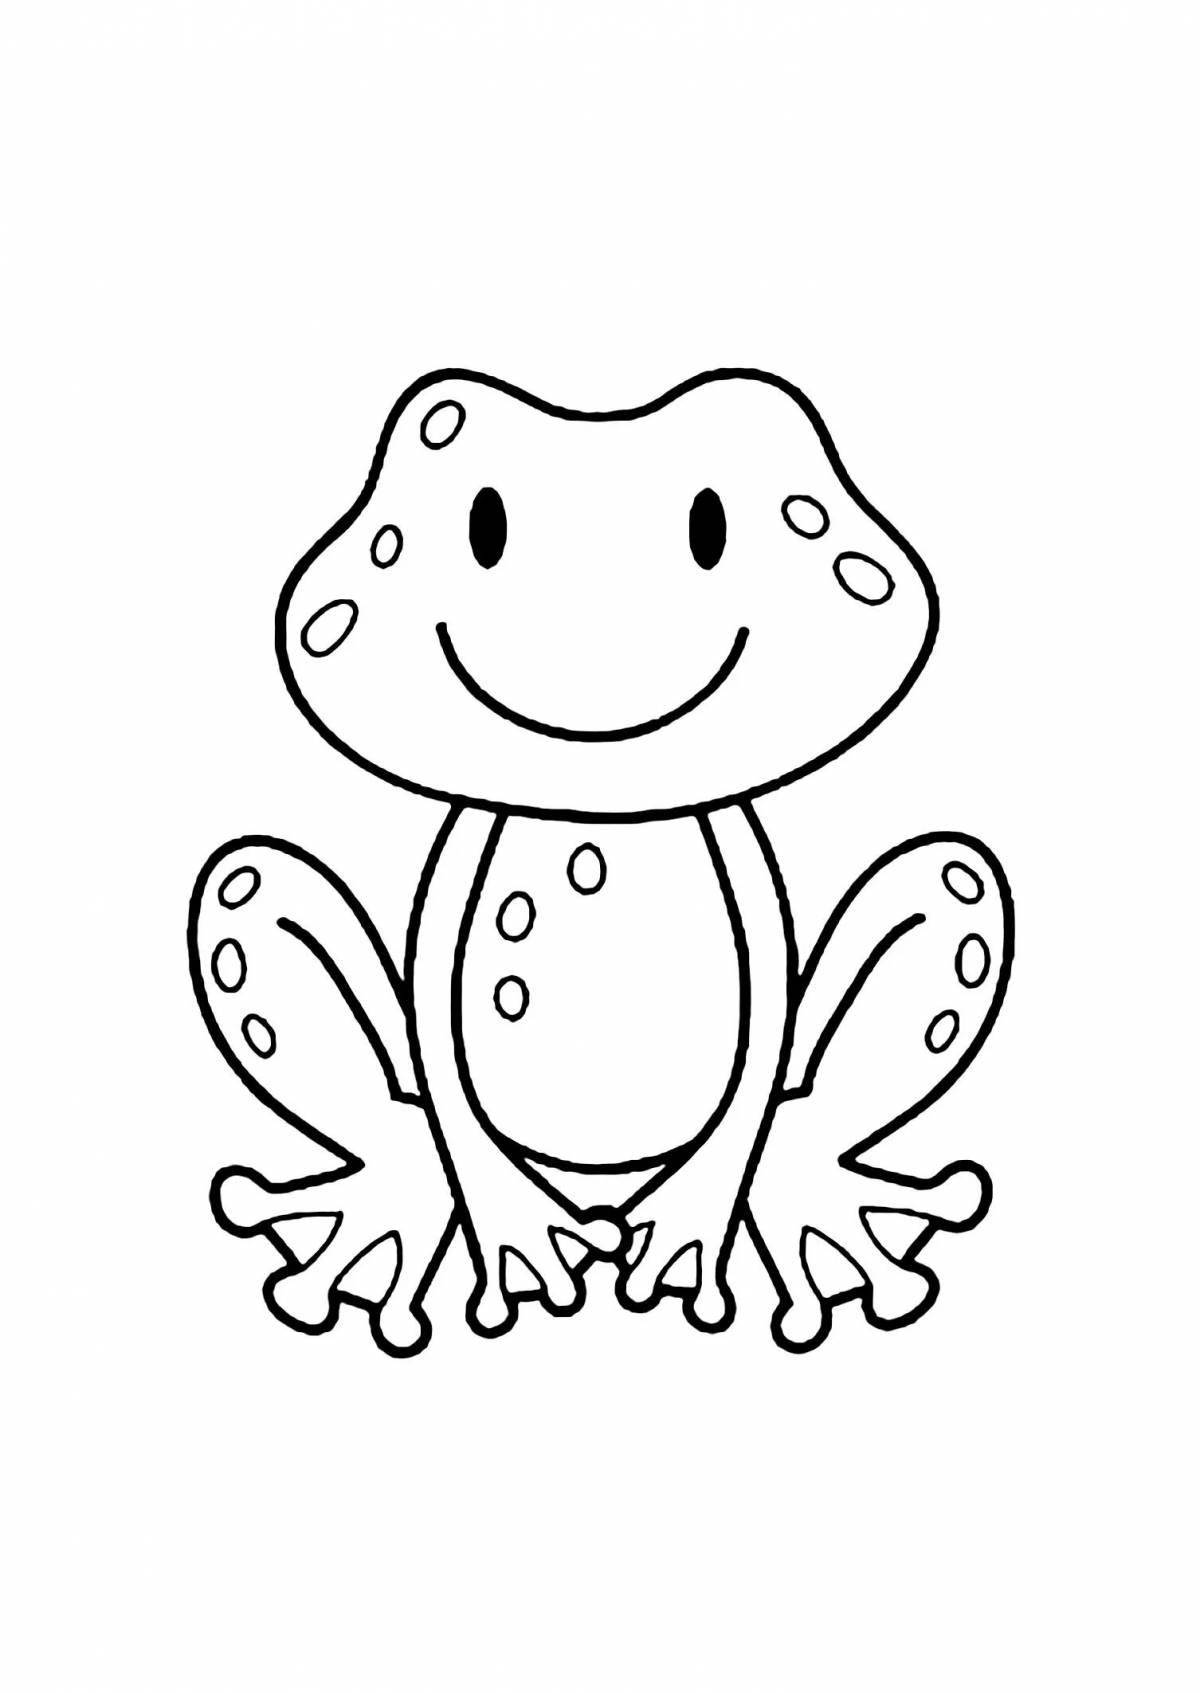 Cute frog coloring page